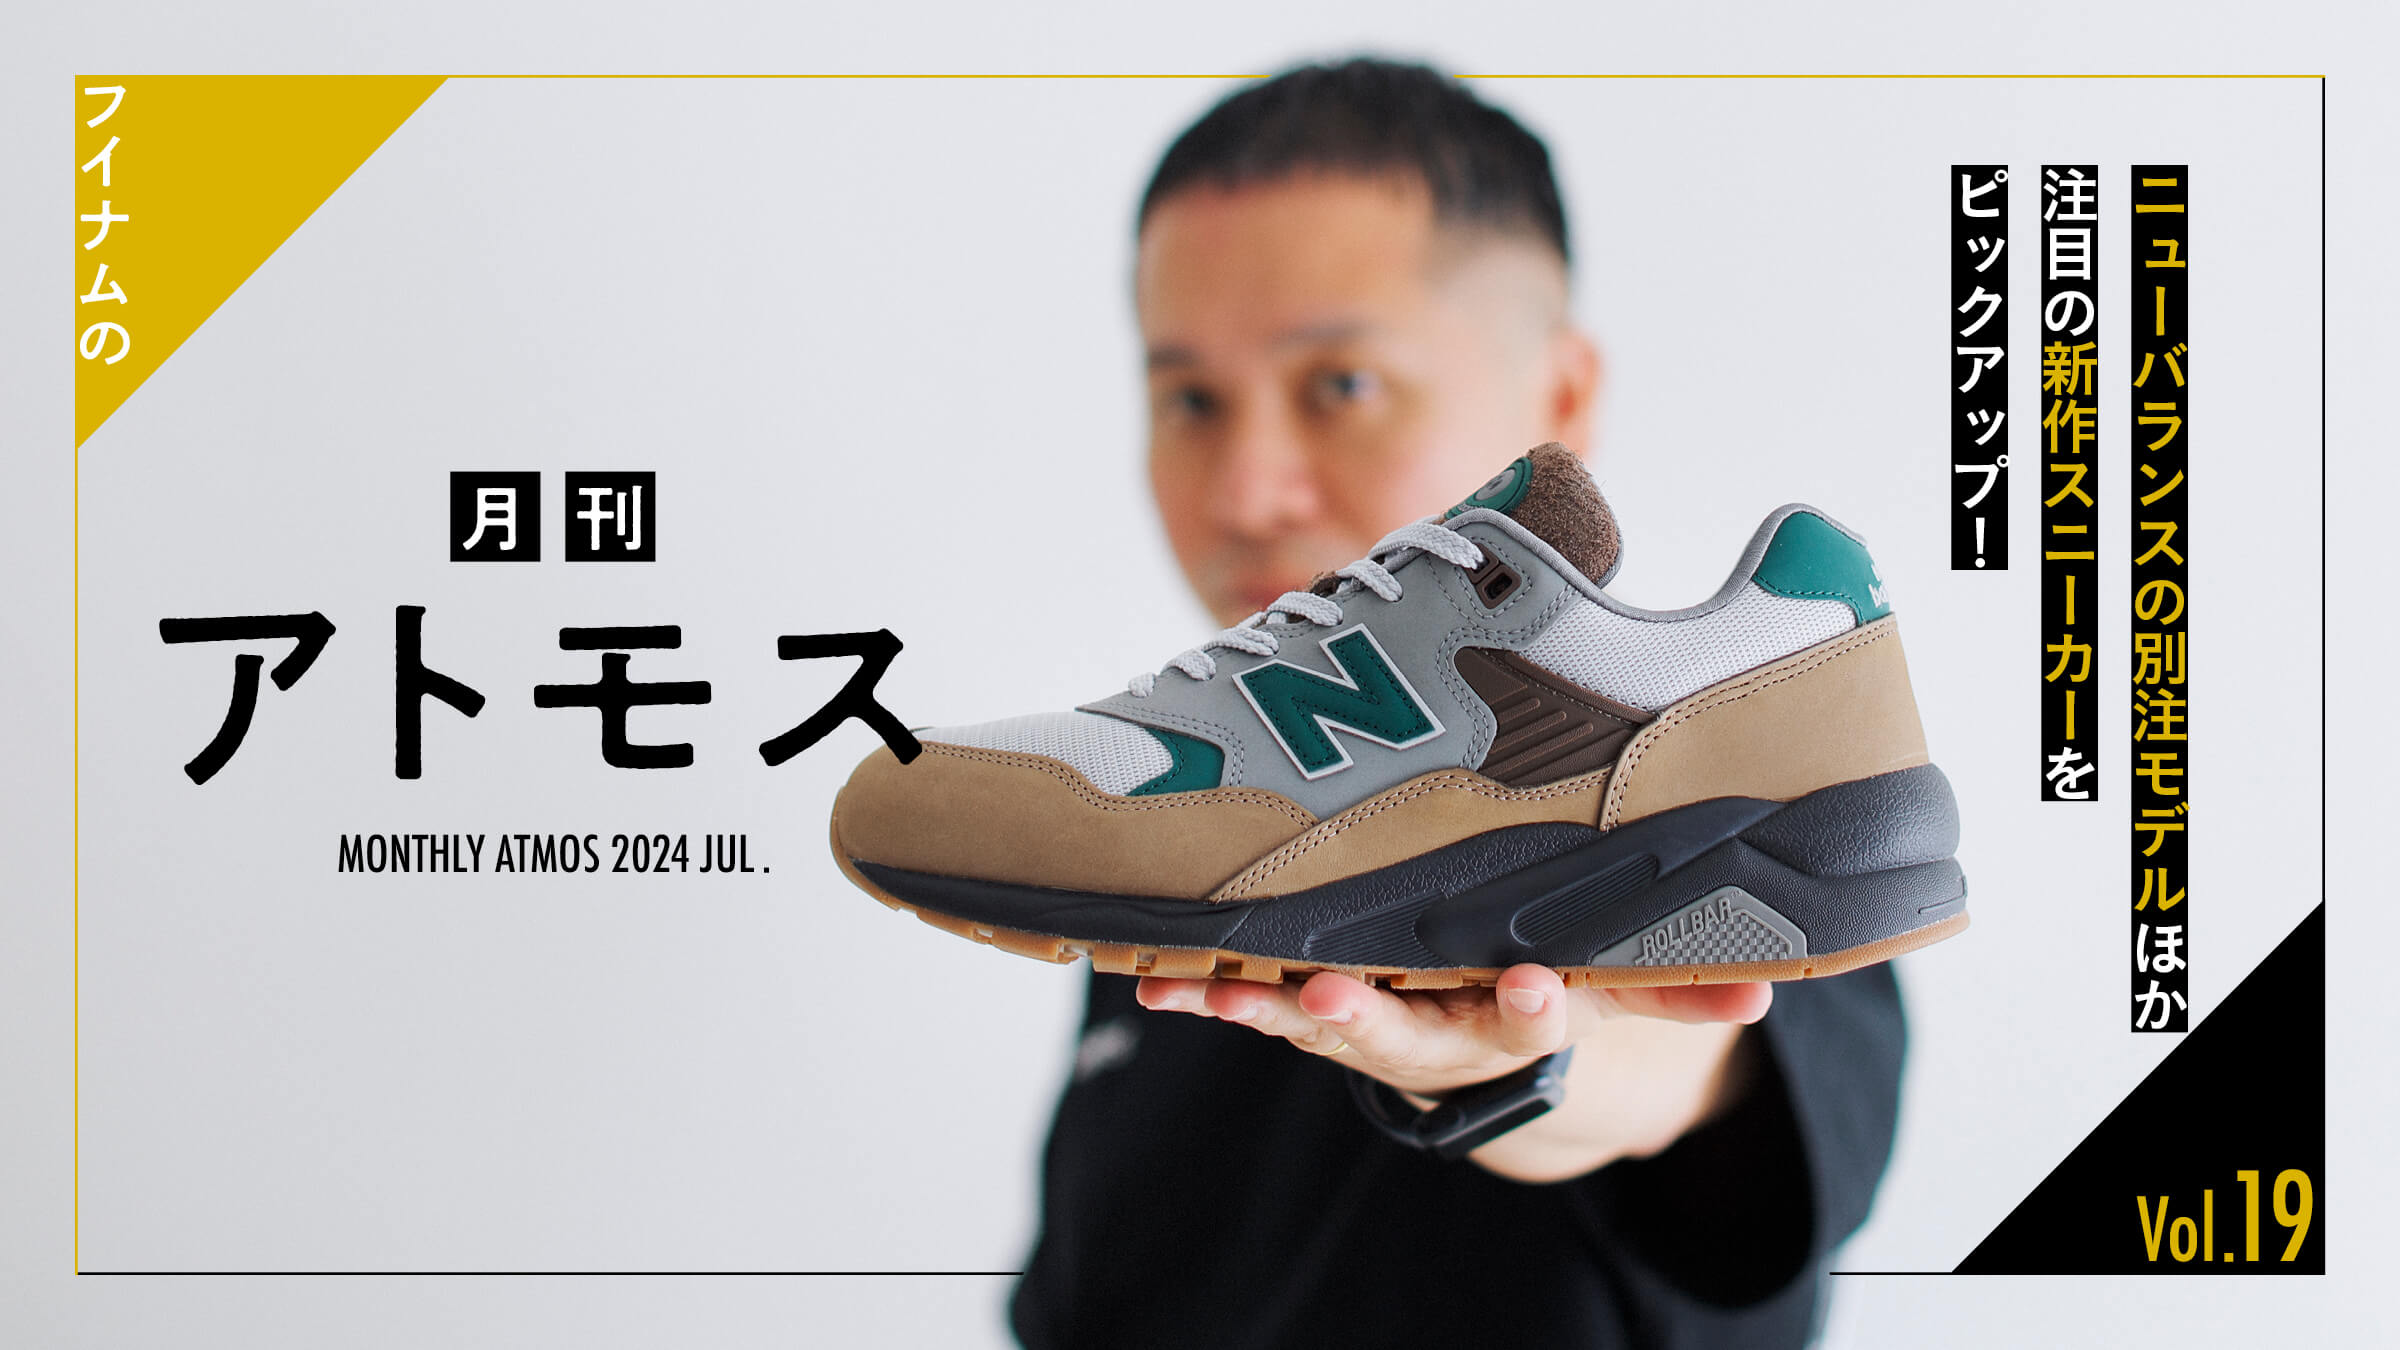 HOUYHNHNM's "Monthly ATMOS" Vol. 19 picks up a special order model of New Balance and other hot new sneakers!